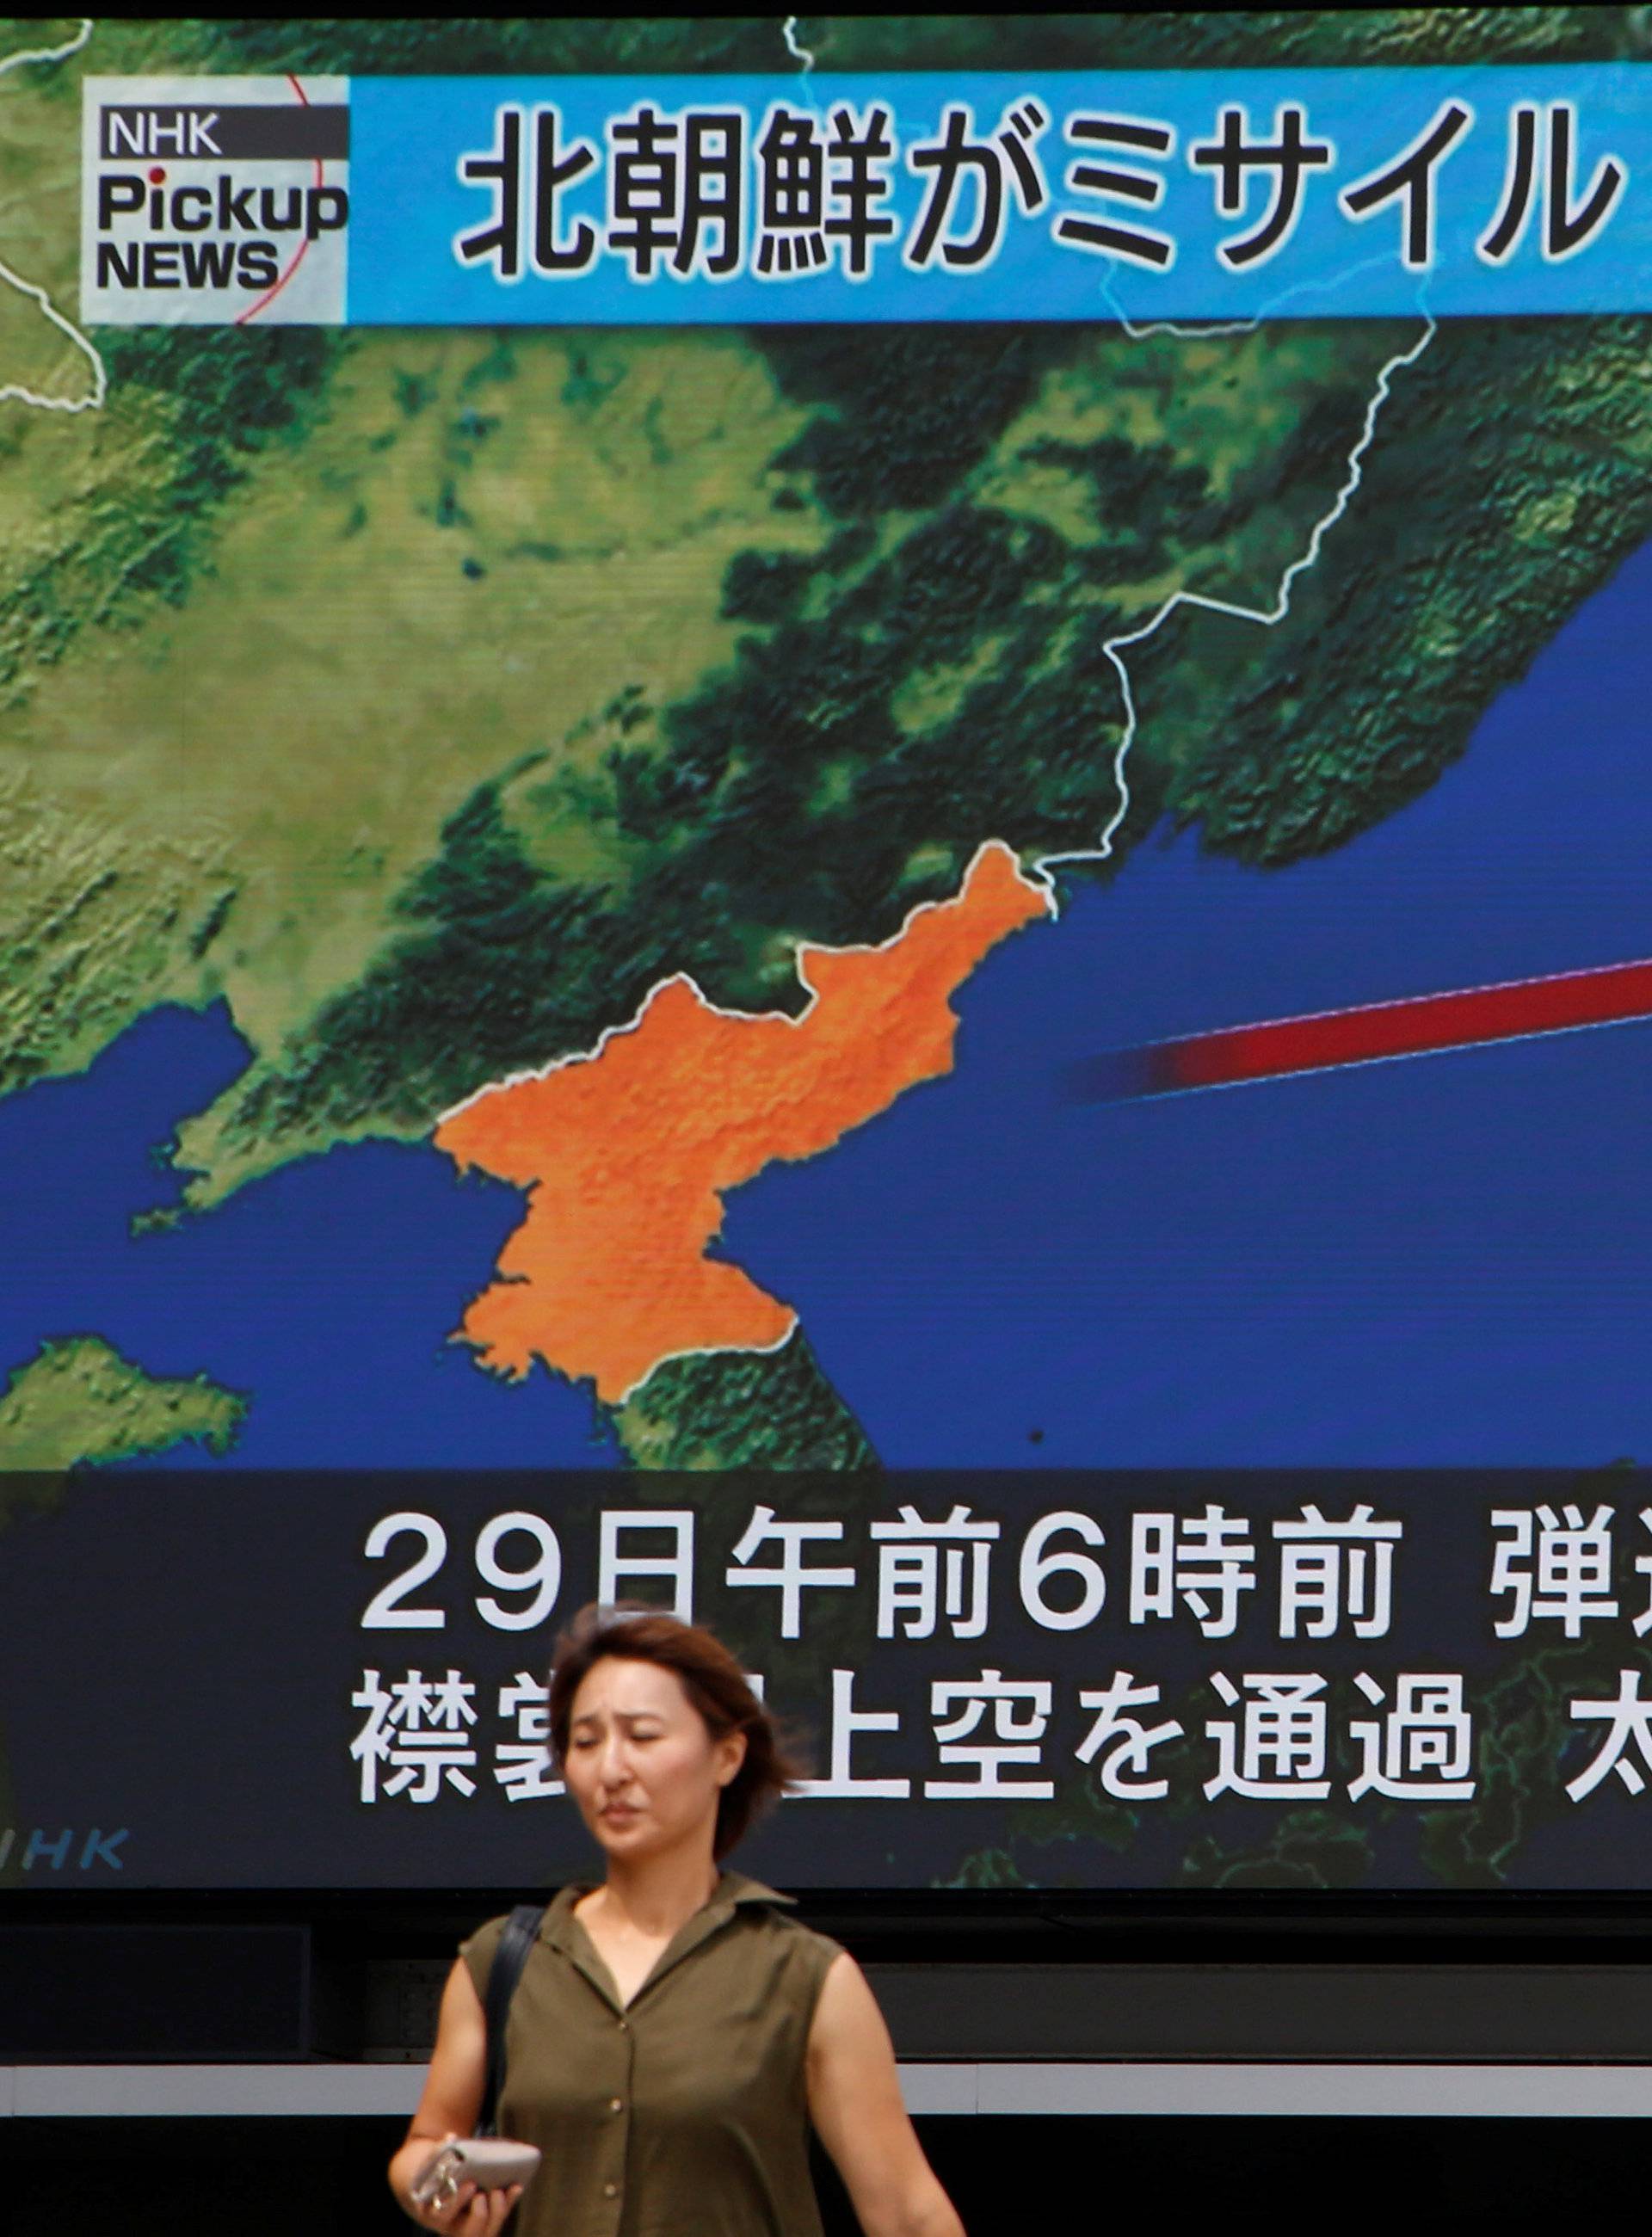 A woman walks past a large TV screen showing news about North Korea's missile launch in Tokyo